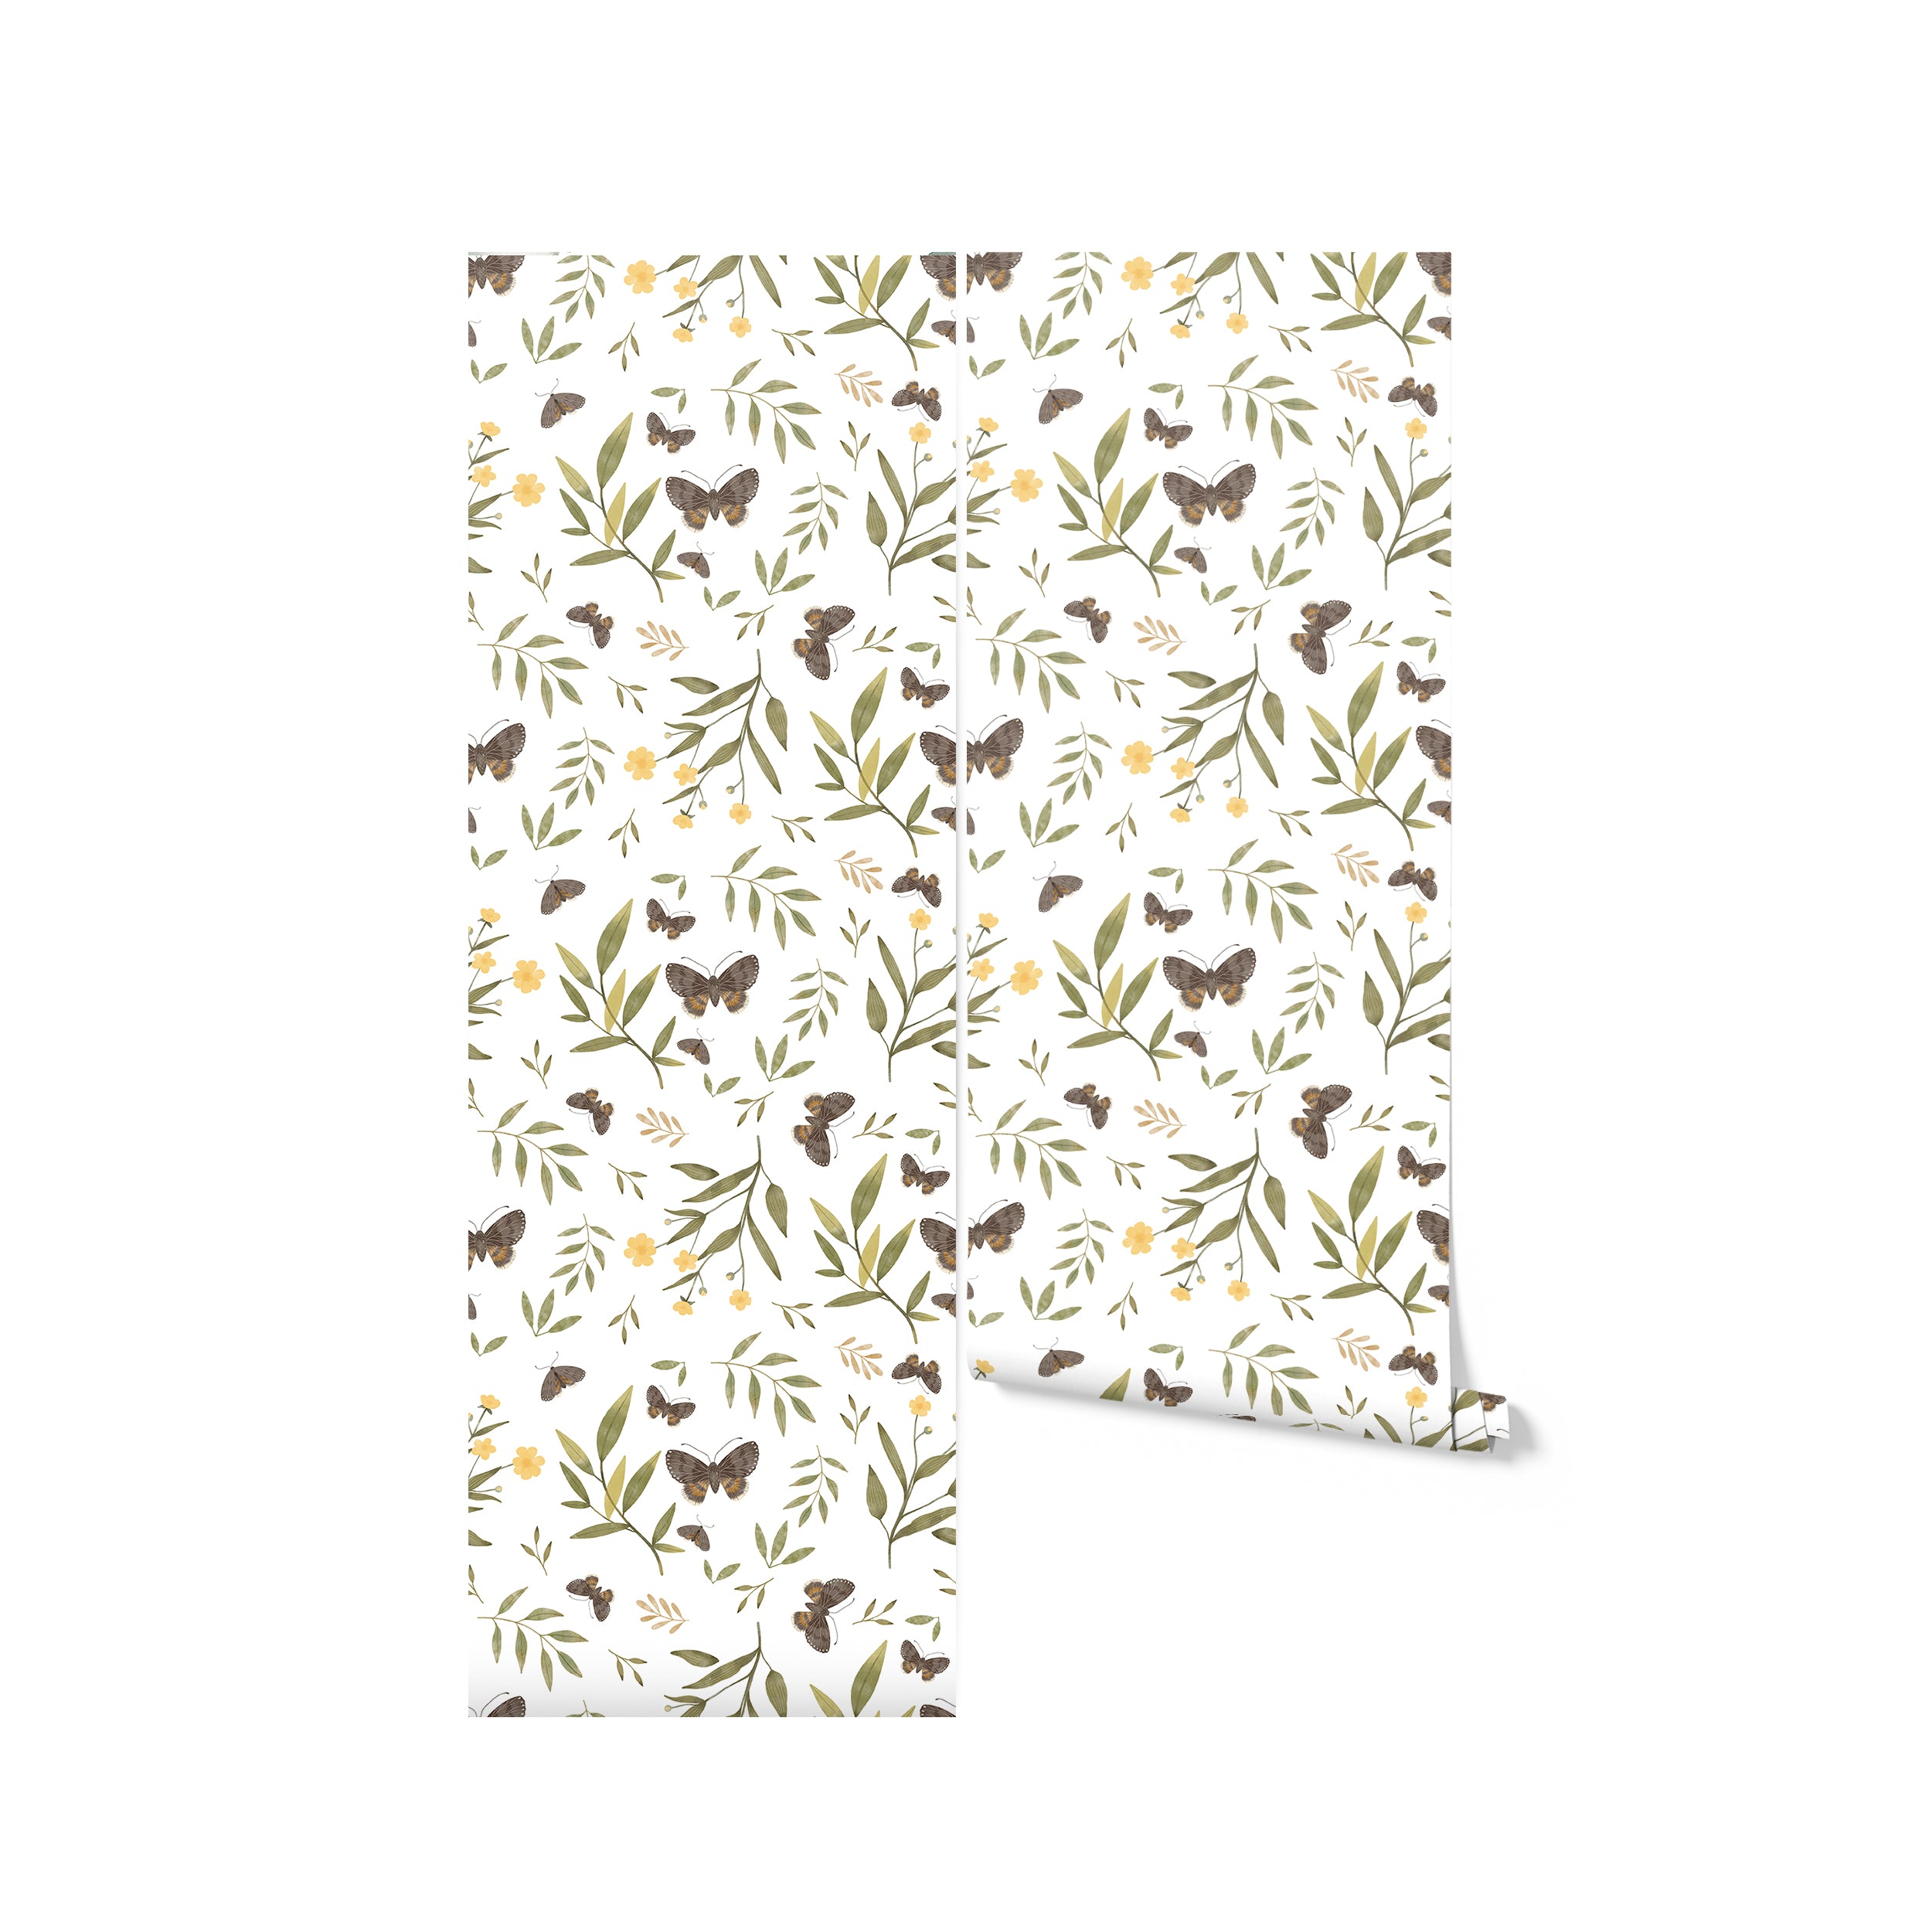 Rolled view of Forest Moth Wallpaper, displaying an intricate pattern of moths, green foliage, and small yellow flowers on a white background. This wallpaper is perfect for bringing a touch of nature’s tranquility to any interior space.